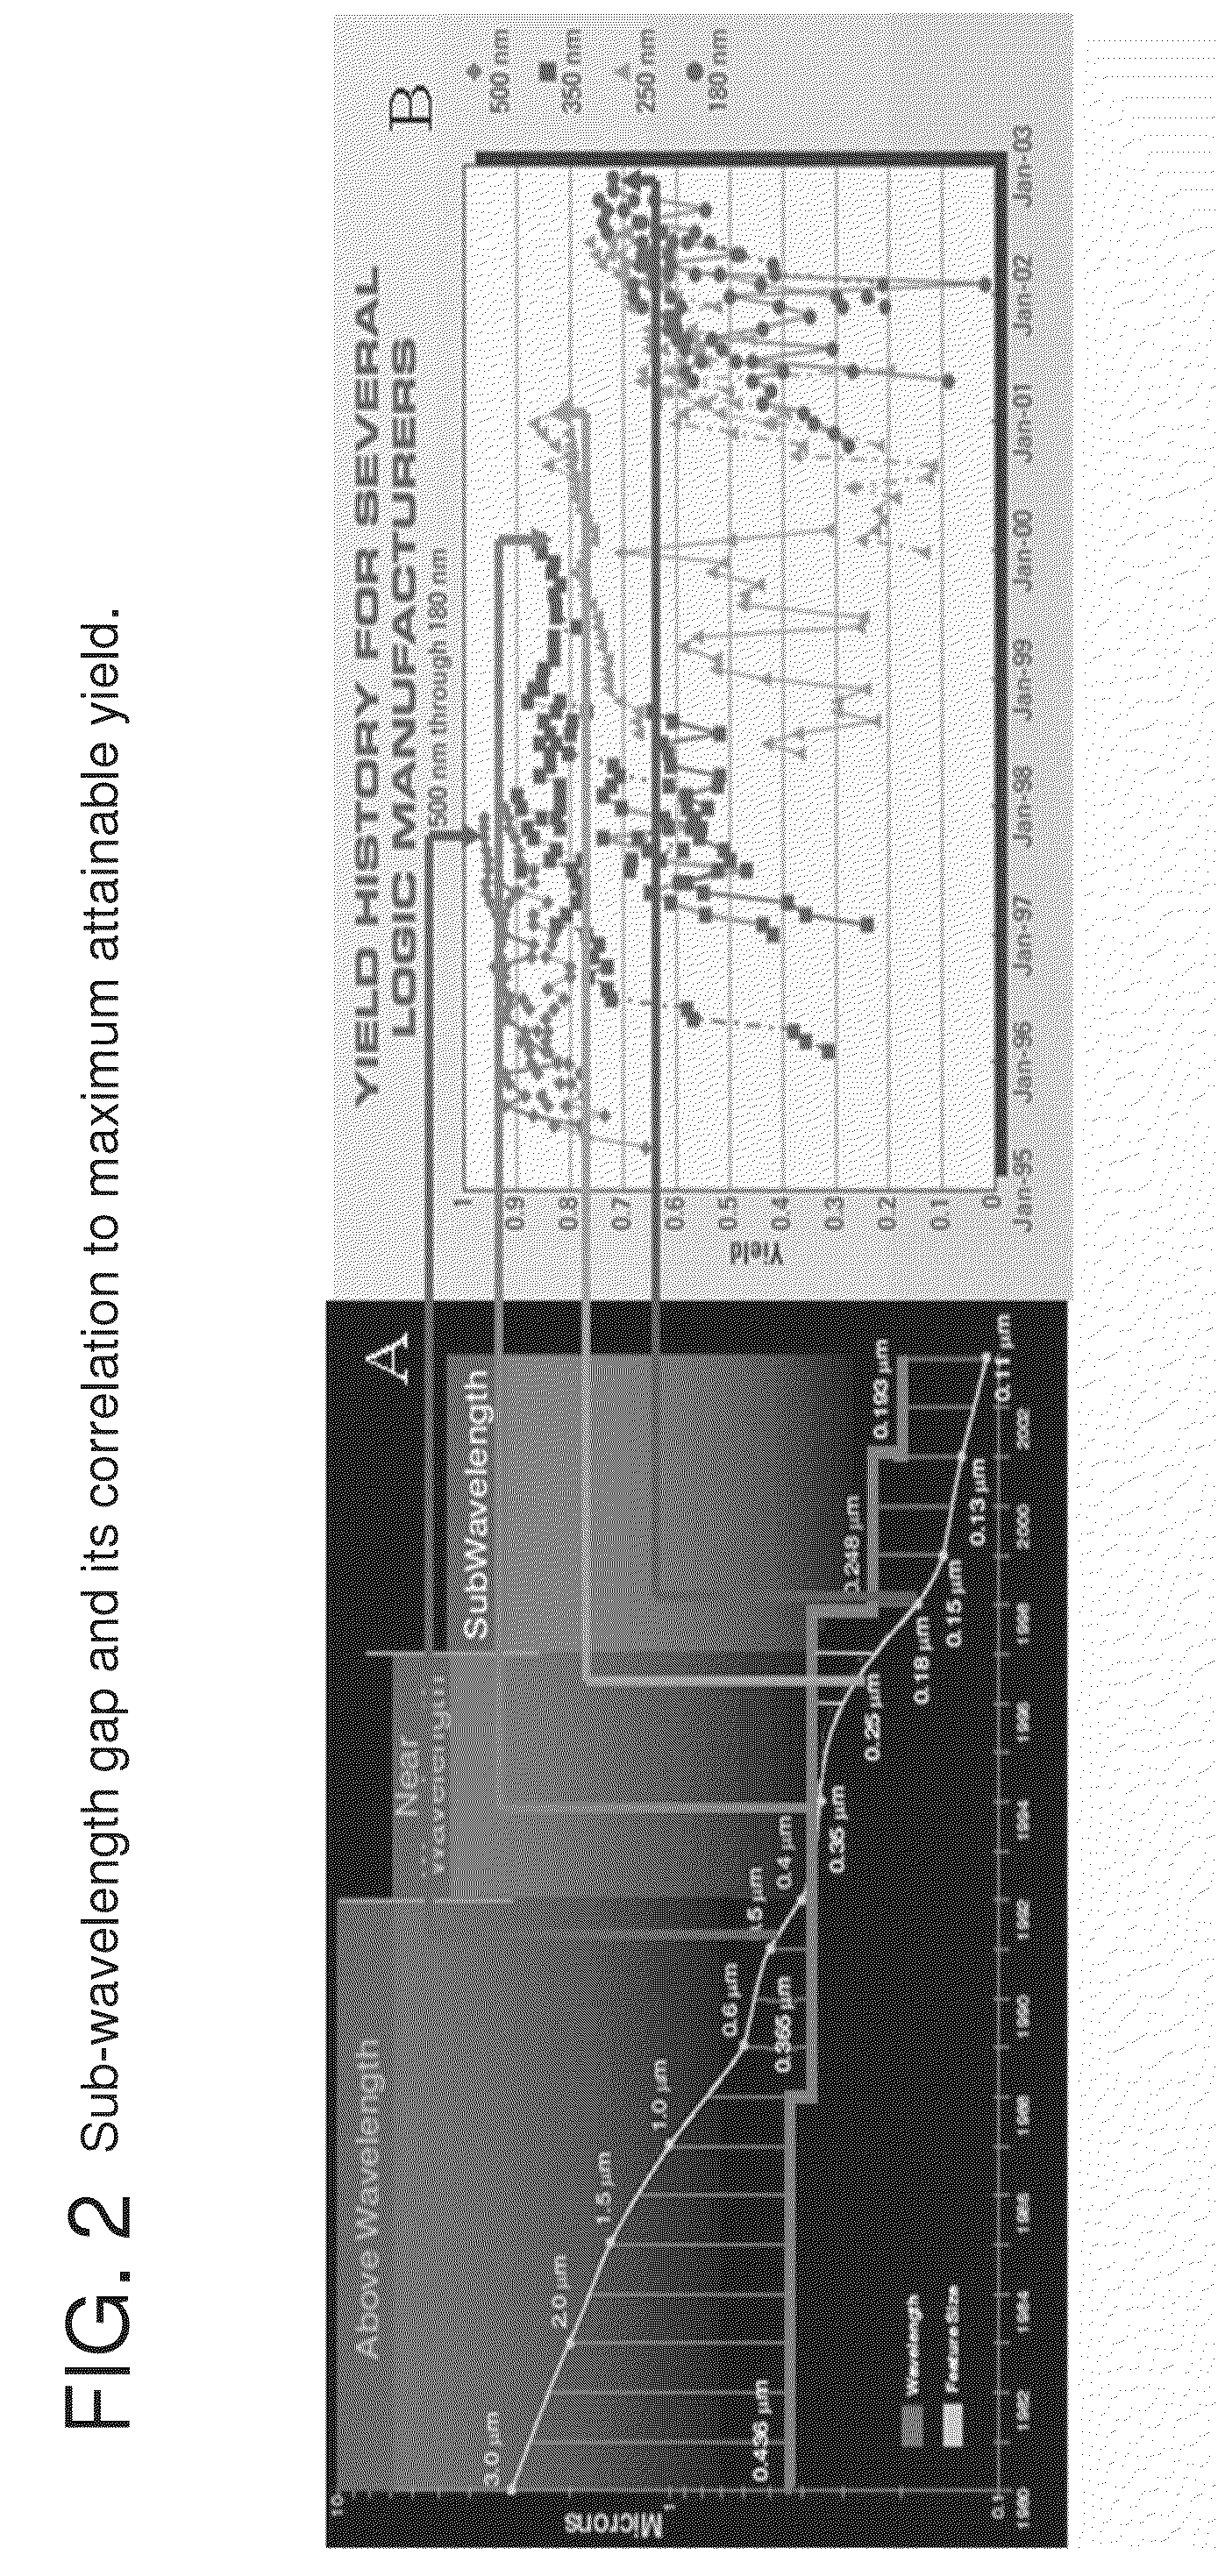 Integrated circuit layout design methodology with process variation bands